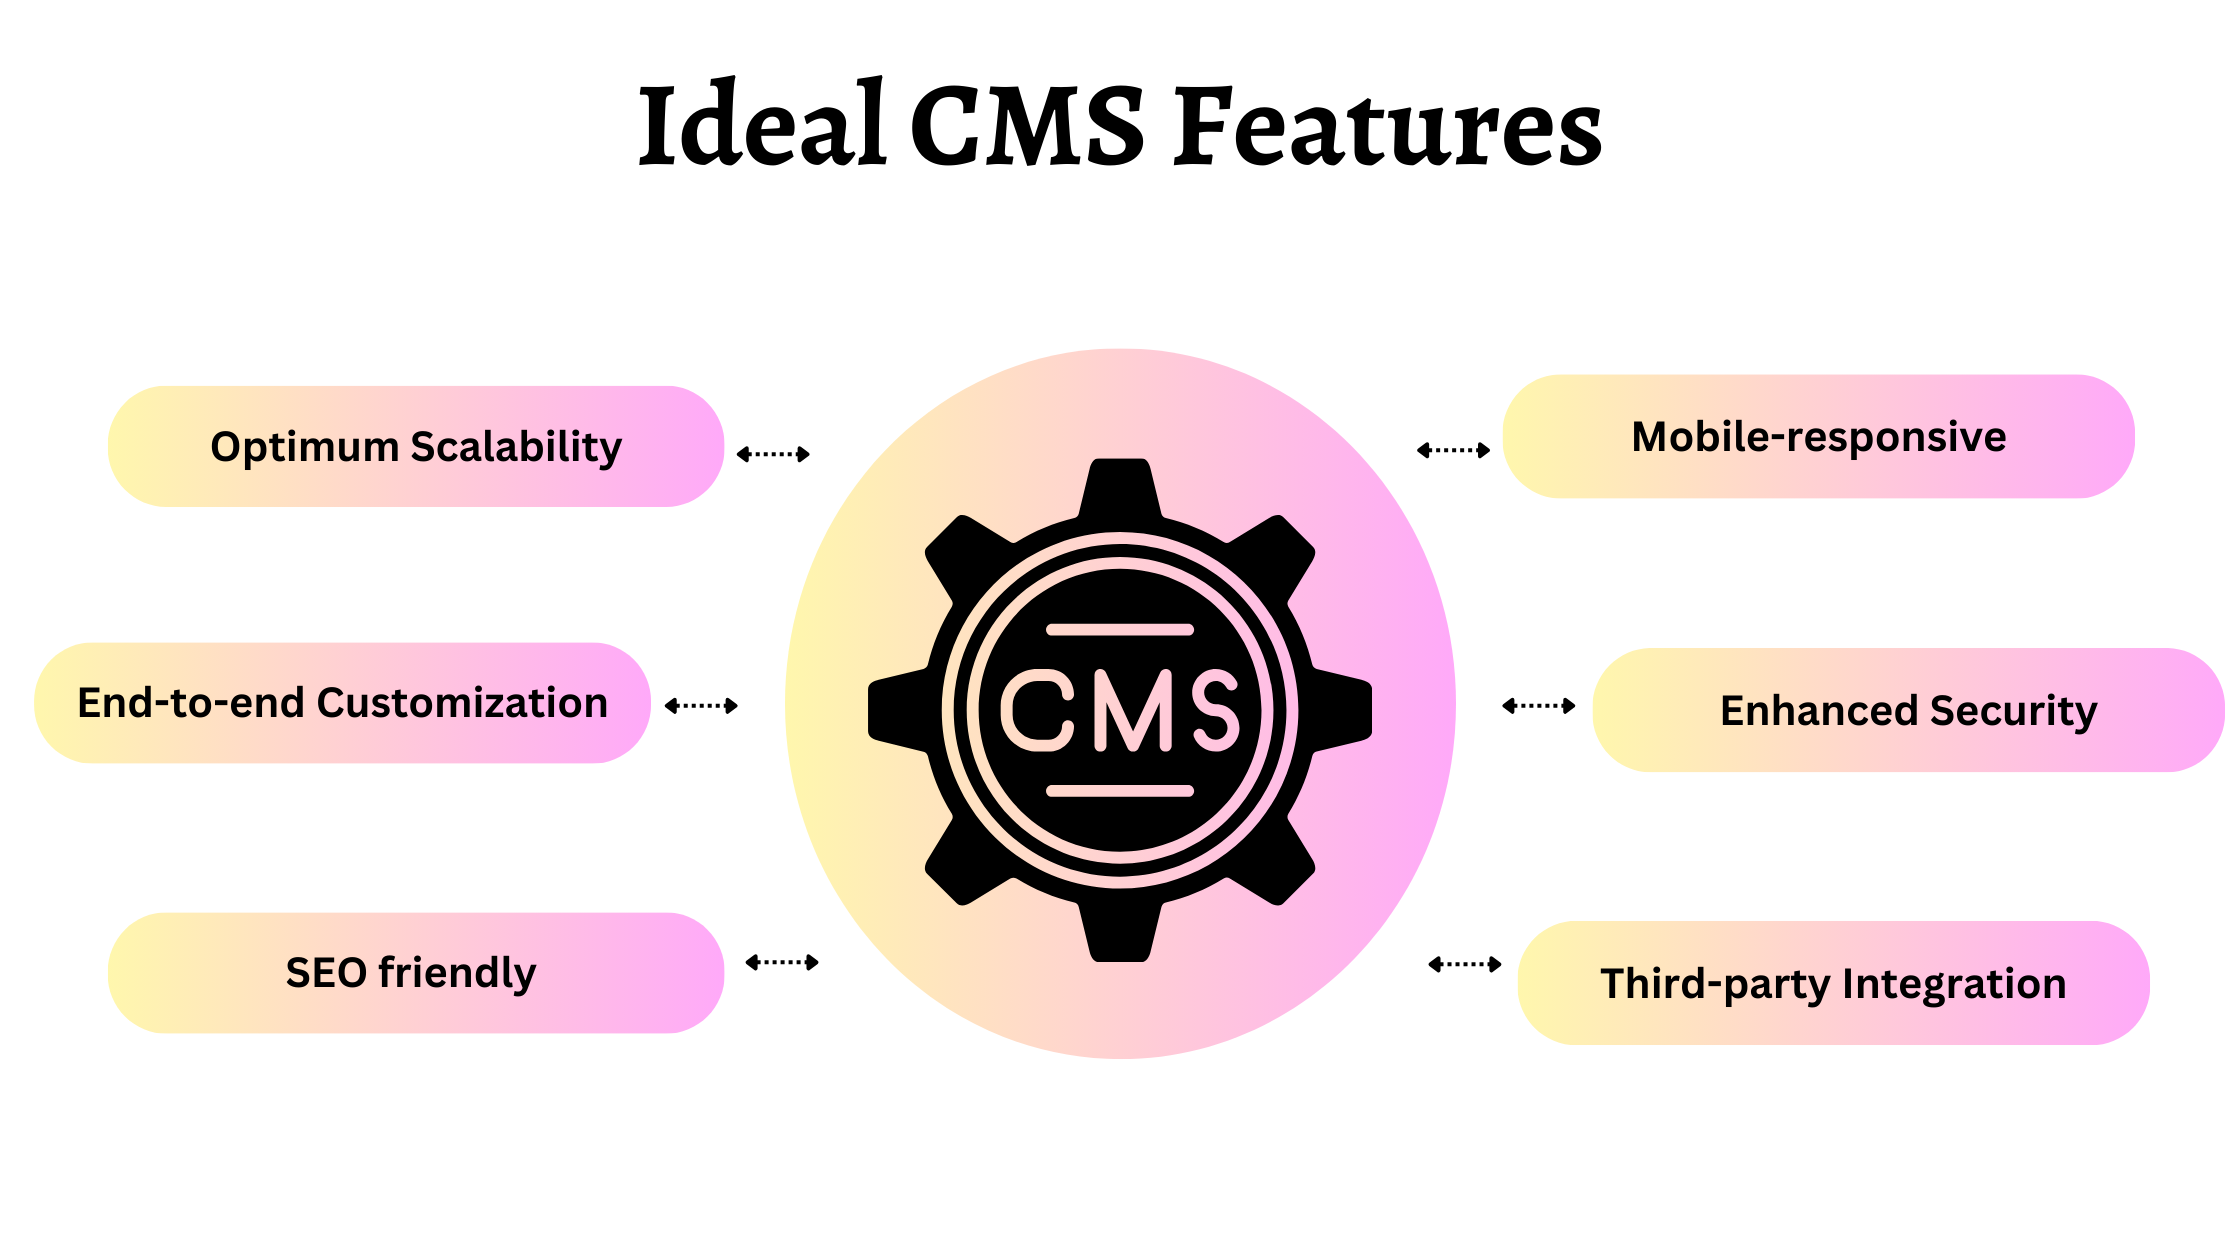 Ideal CMS Features